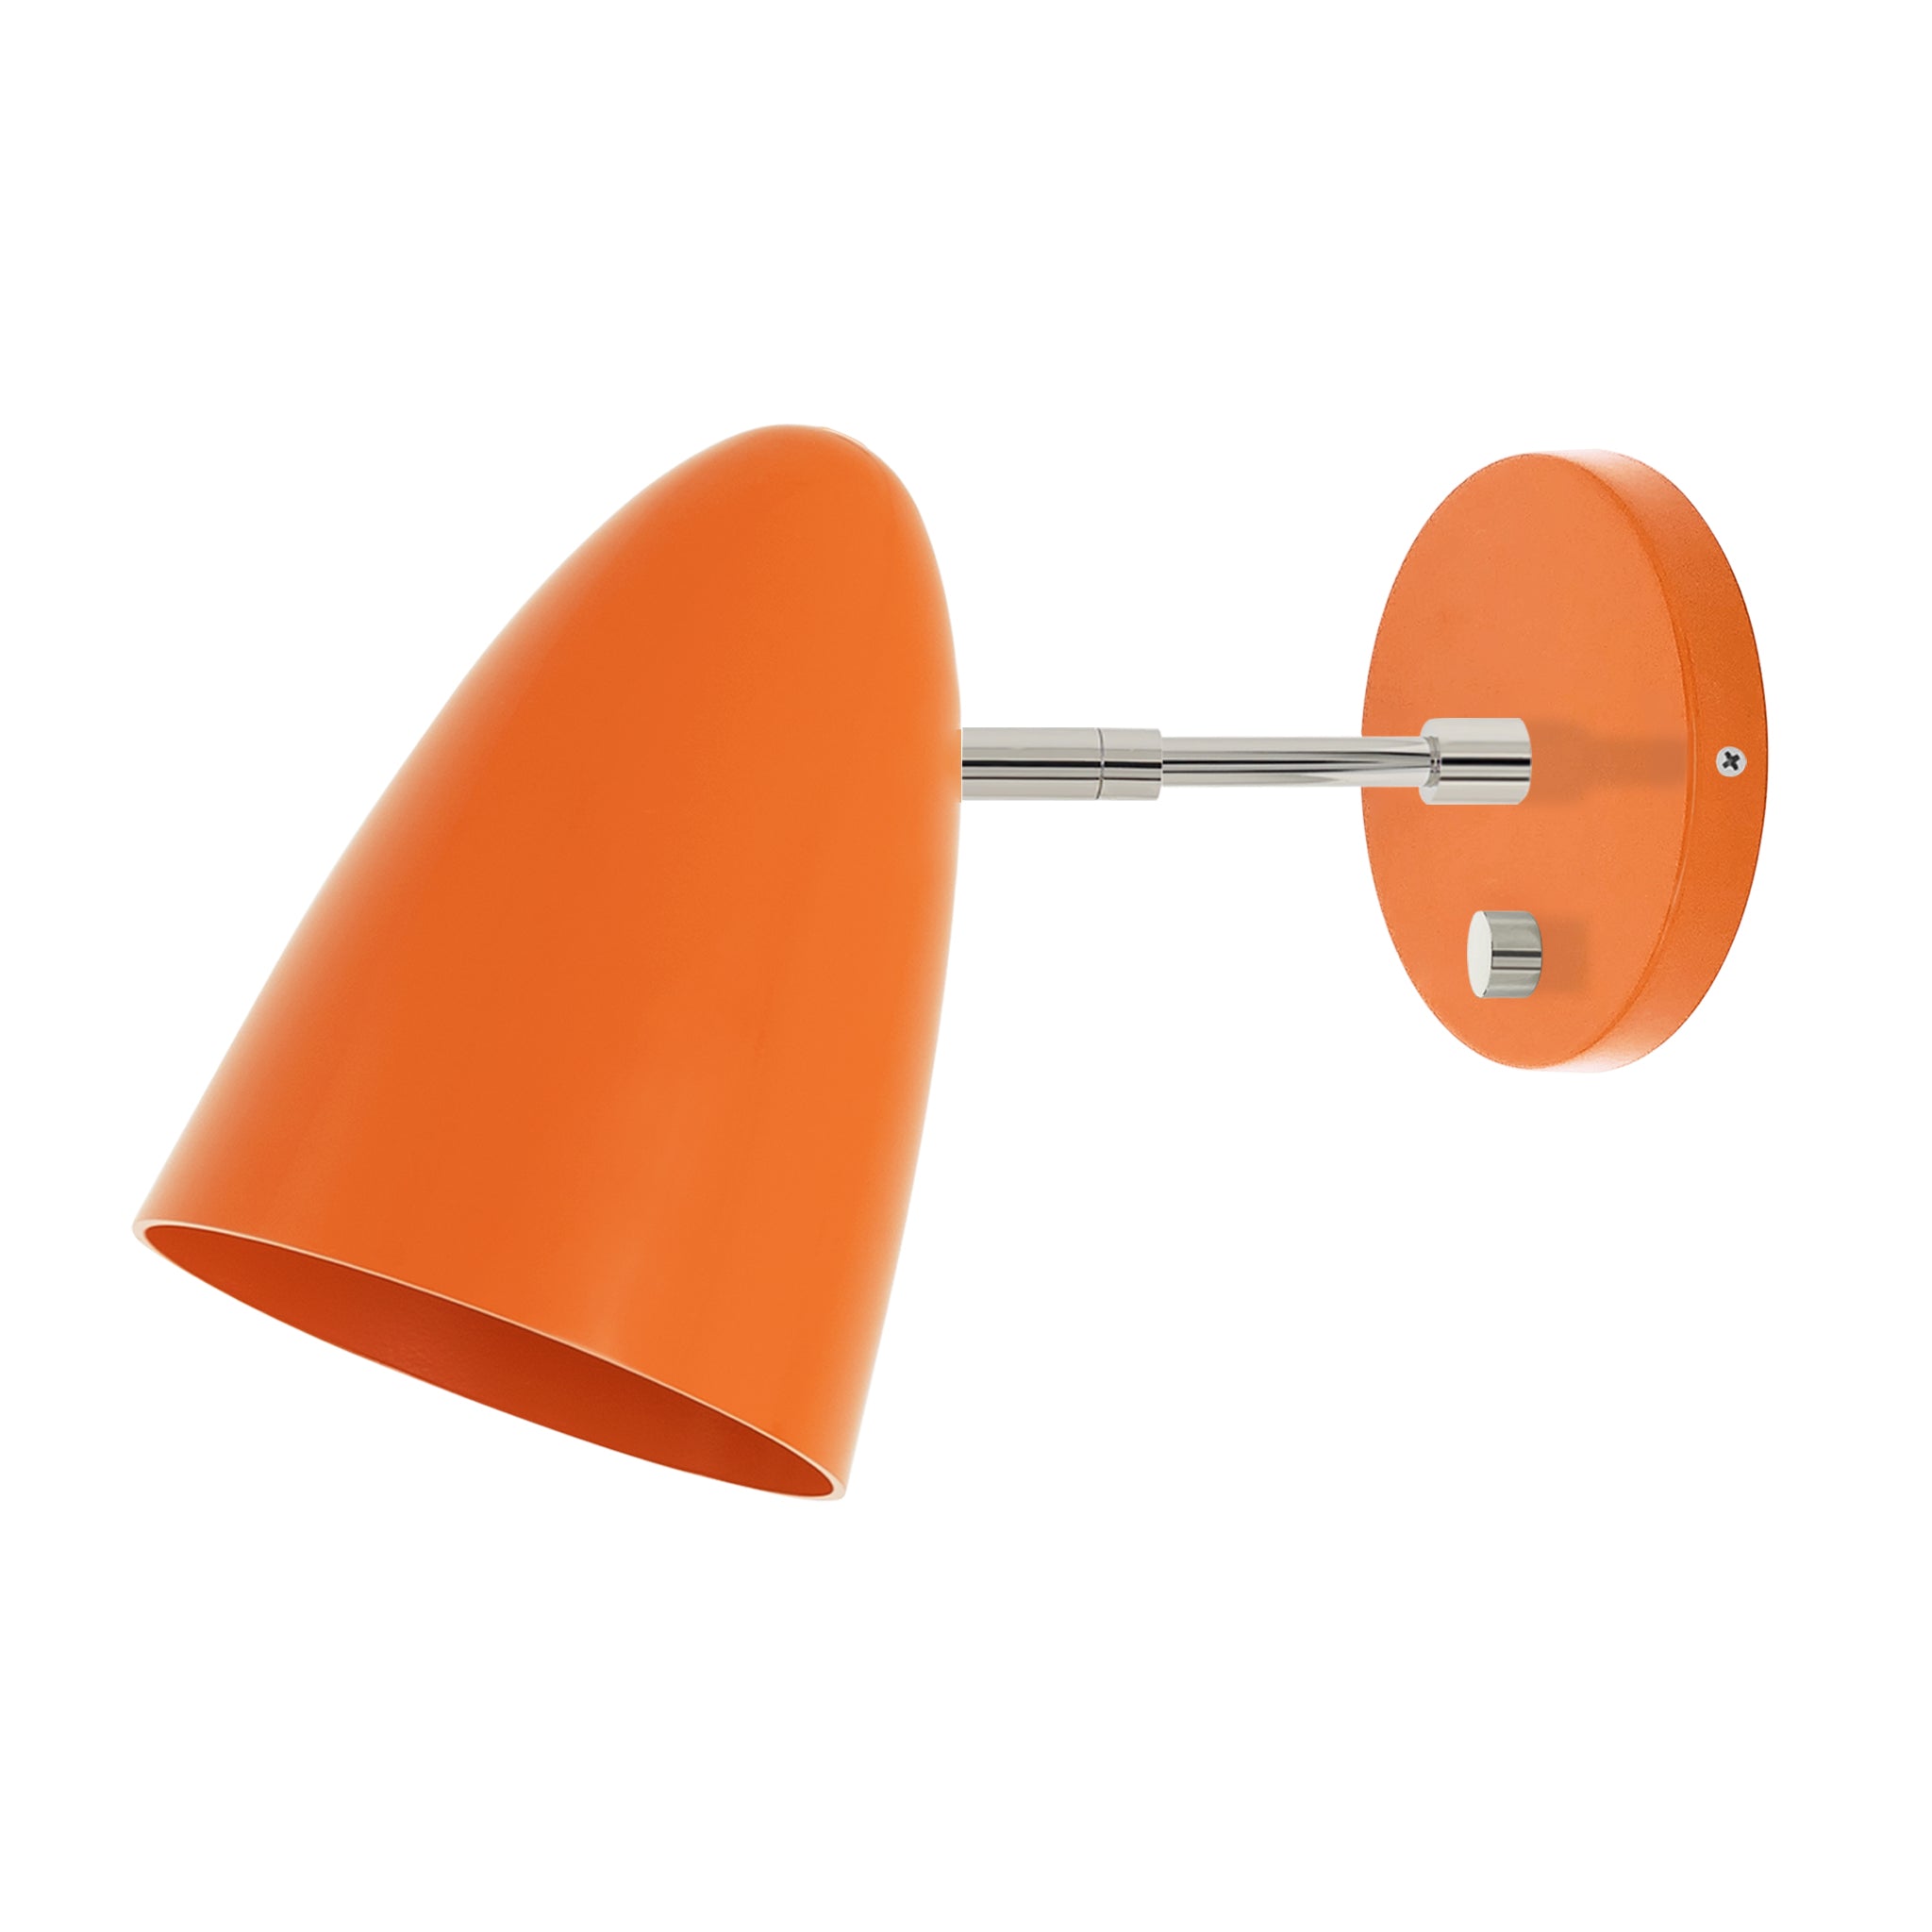 Nickel and orange color Boom sconce 3" arm Dutton Brown lighting